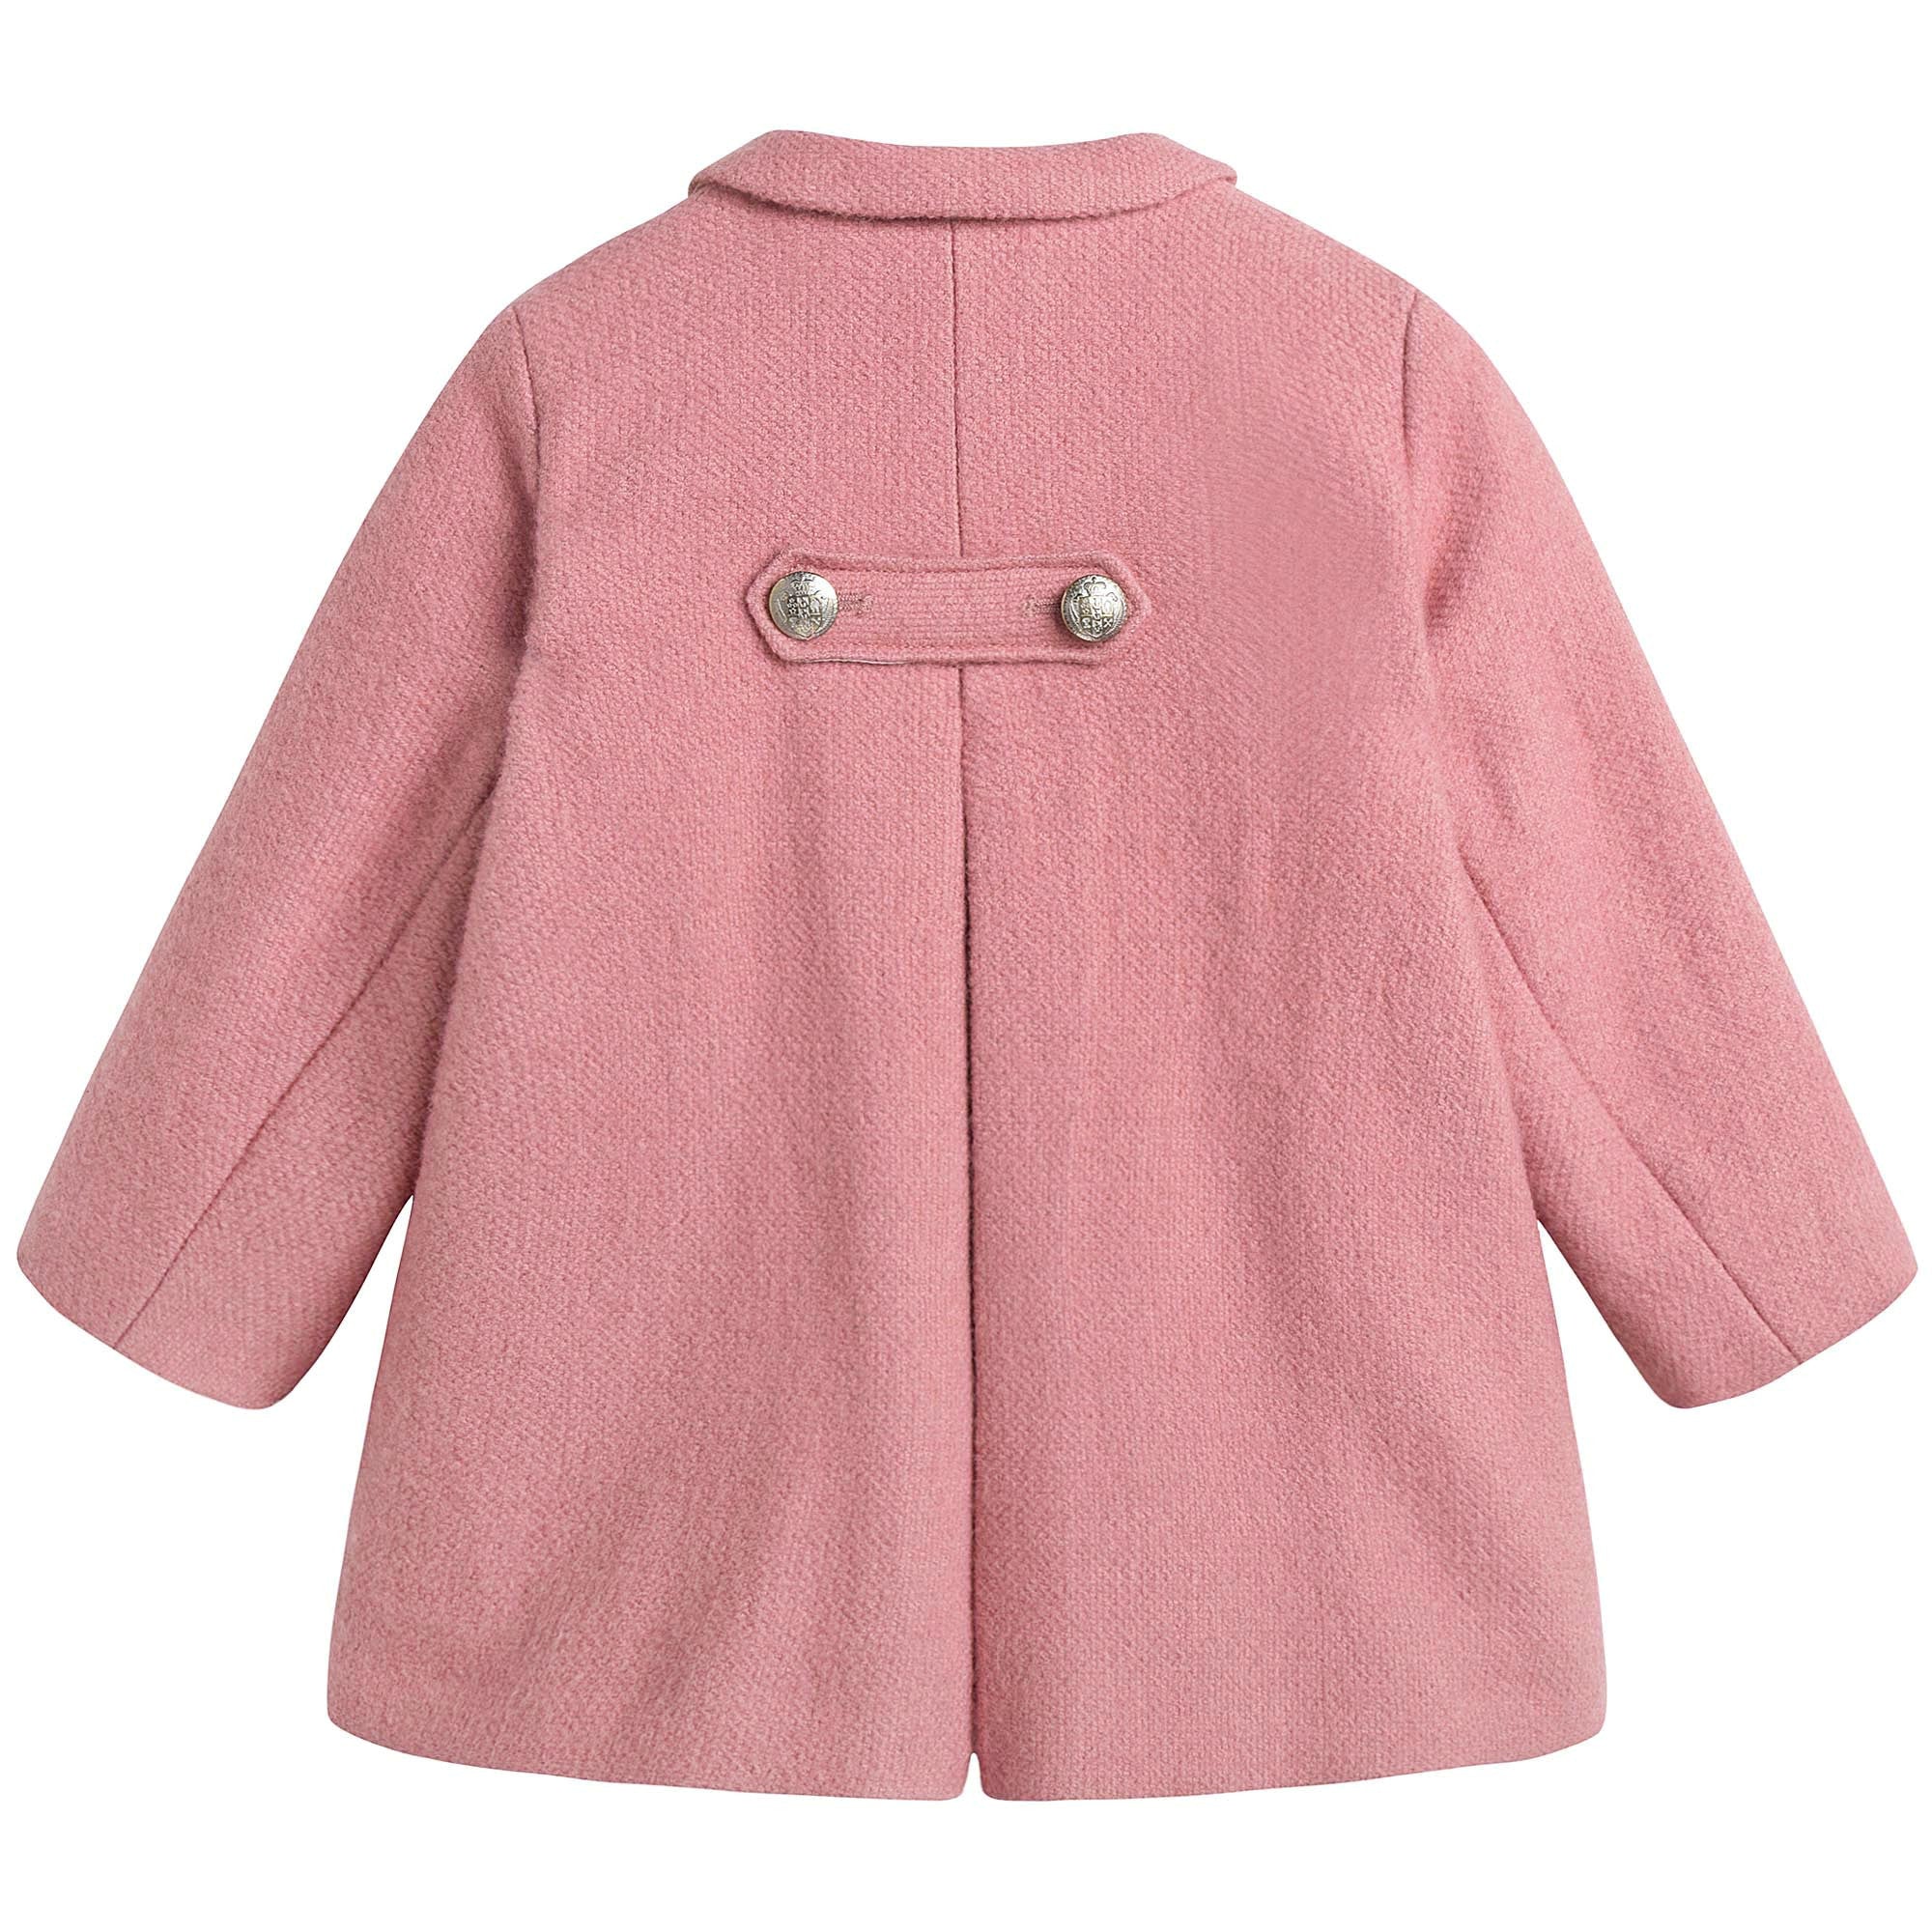 Baby Girls Pink With Gold Bottons Coat - CÉMAROSE | Children's Fashion Store - 2